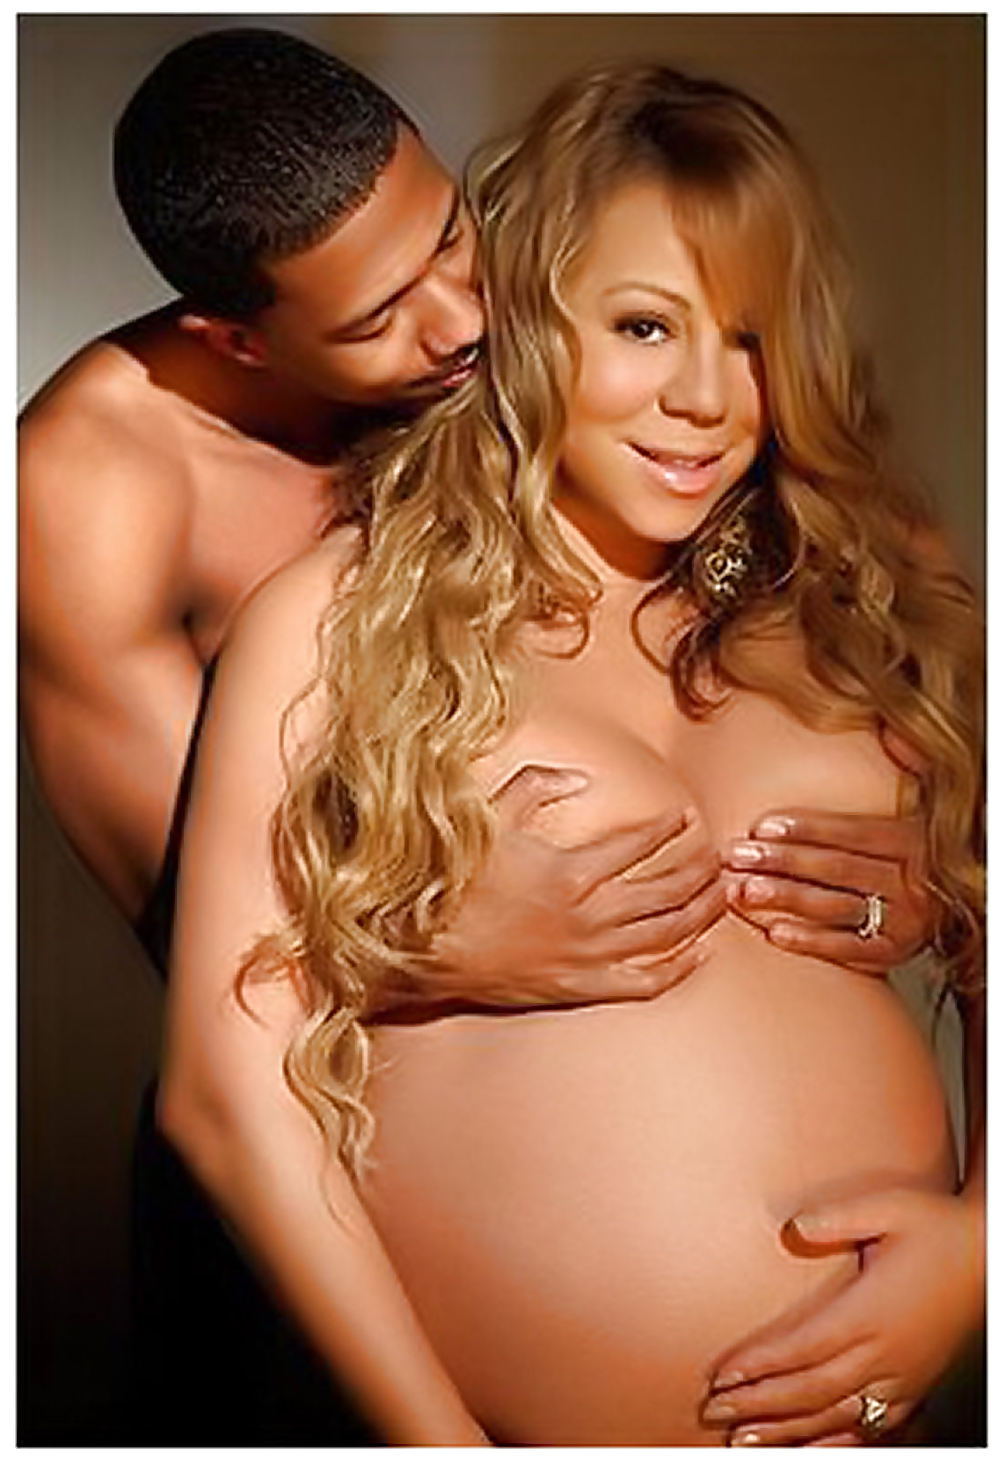 Mariah Carey Pregnant Nude - See and Save As mariah carey naked pregnant londonlad porn pict - 4crot.com